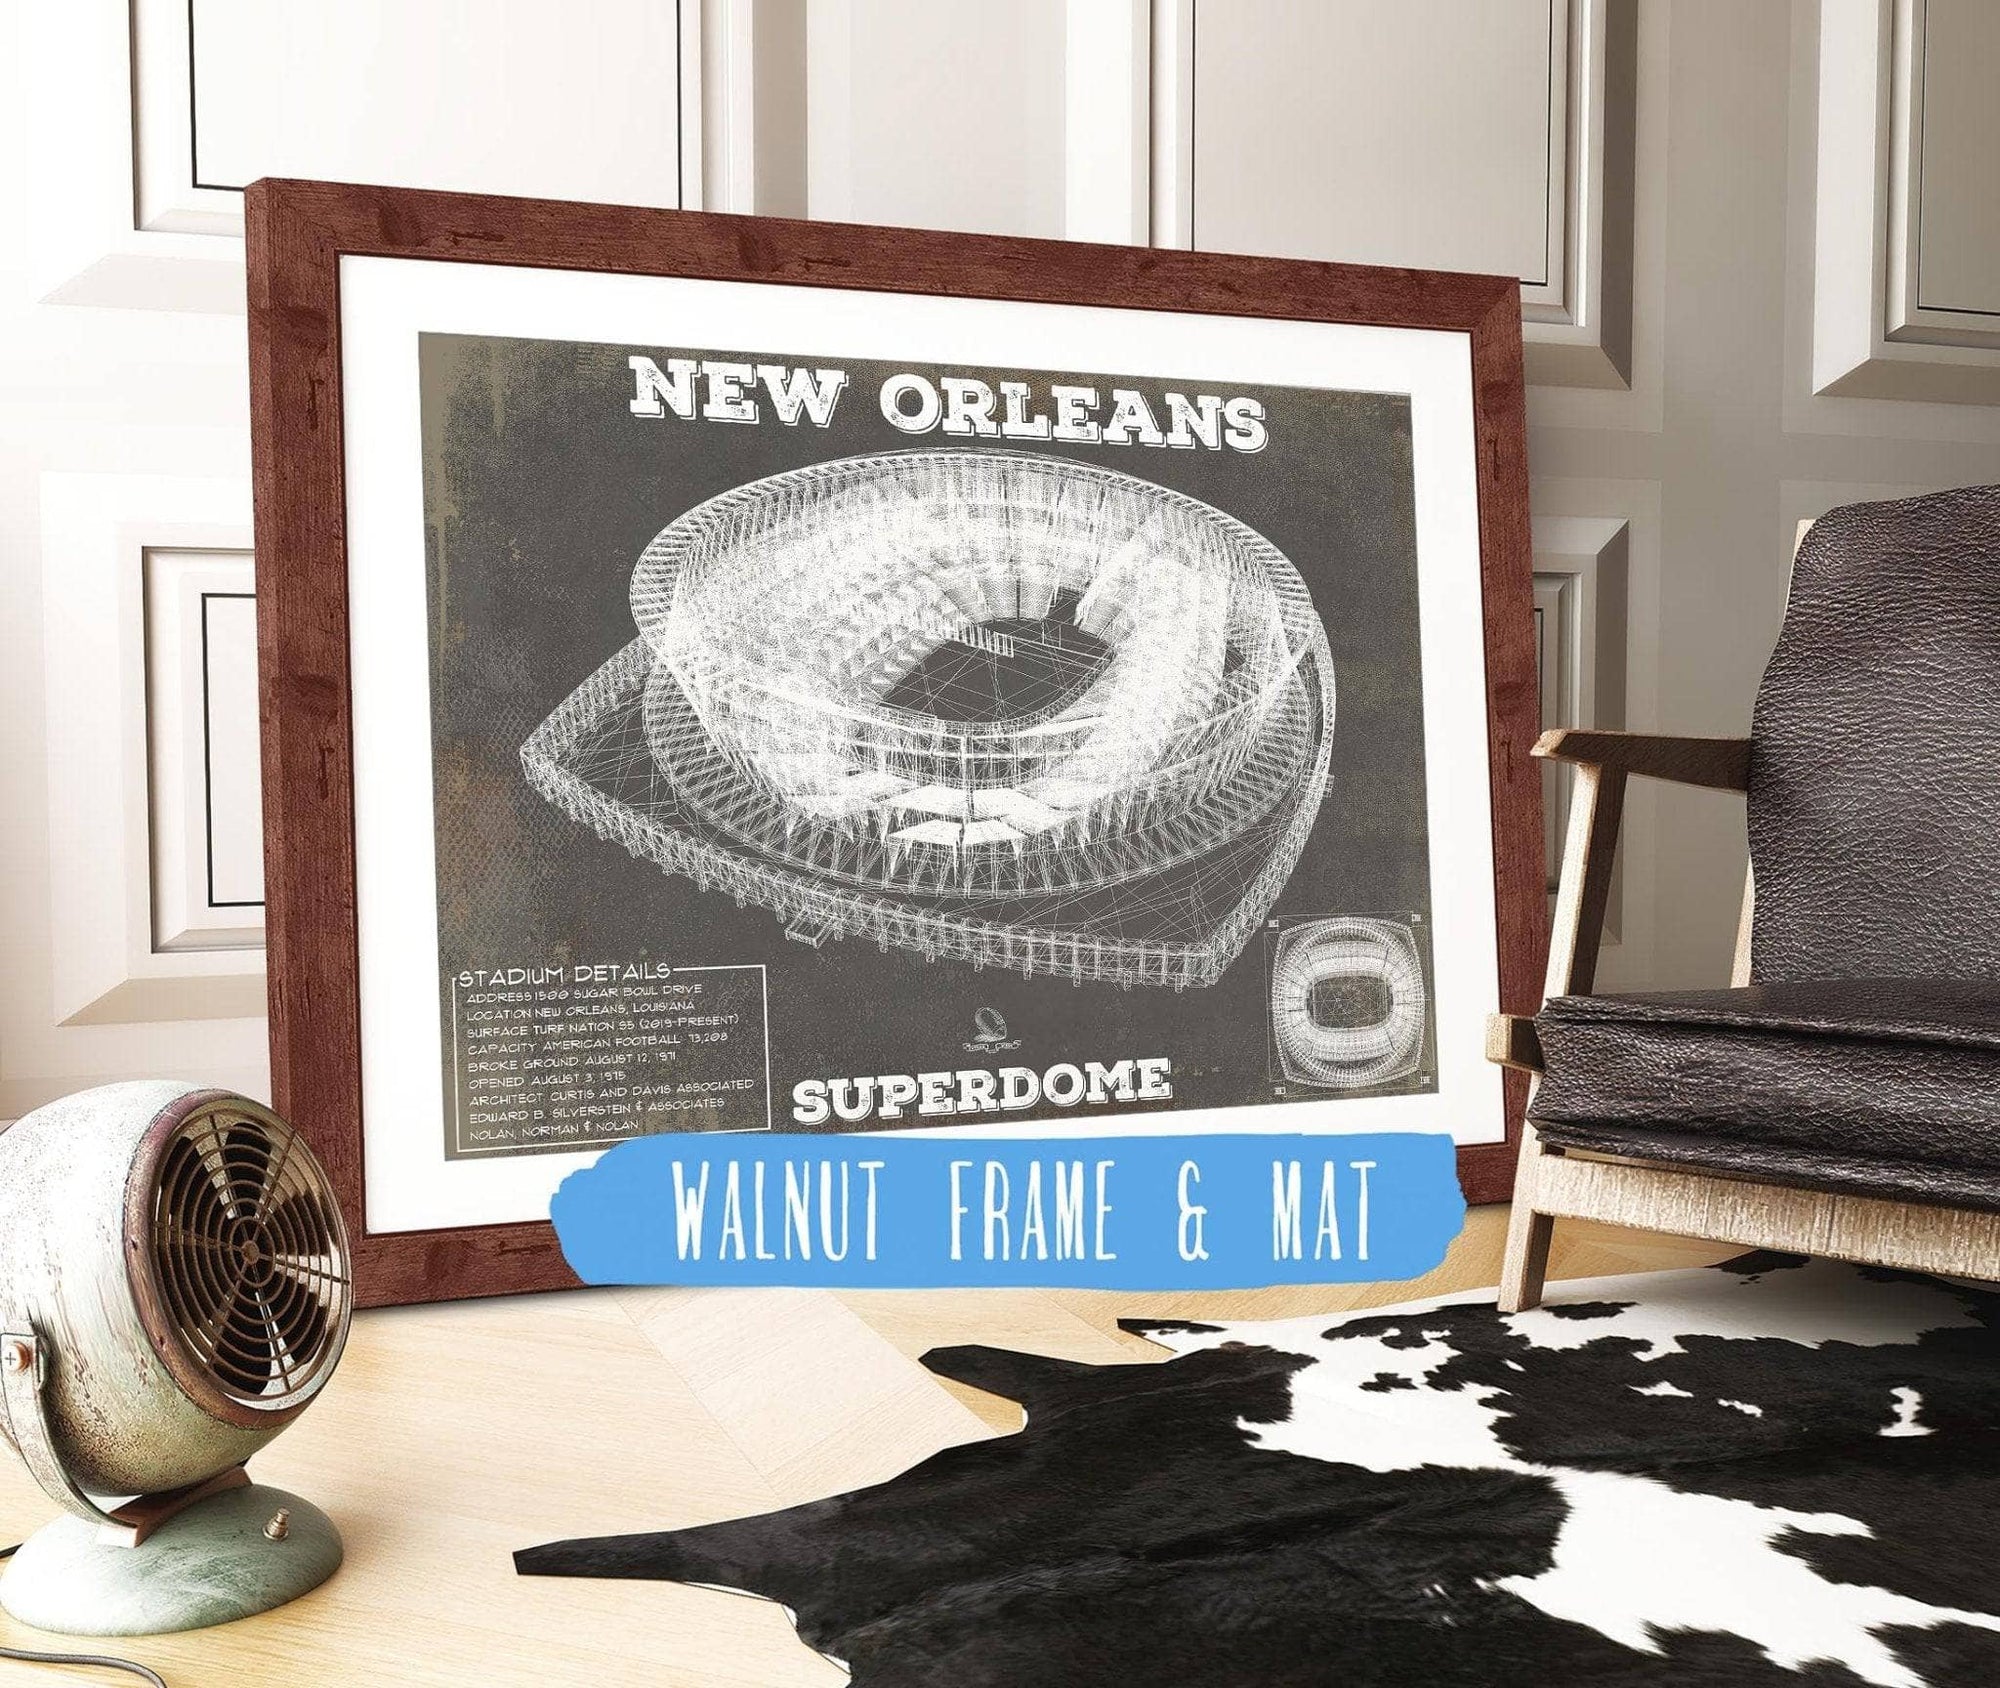 Cutler West Pro Football Collection 14" x 11" / Walnut Frame & Mat New Orleans Saints Superdome Seating Chart - Vintage Football Print 734084112-TOP